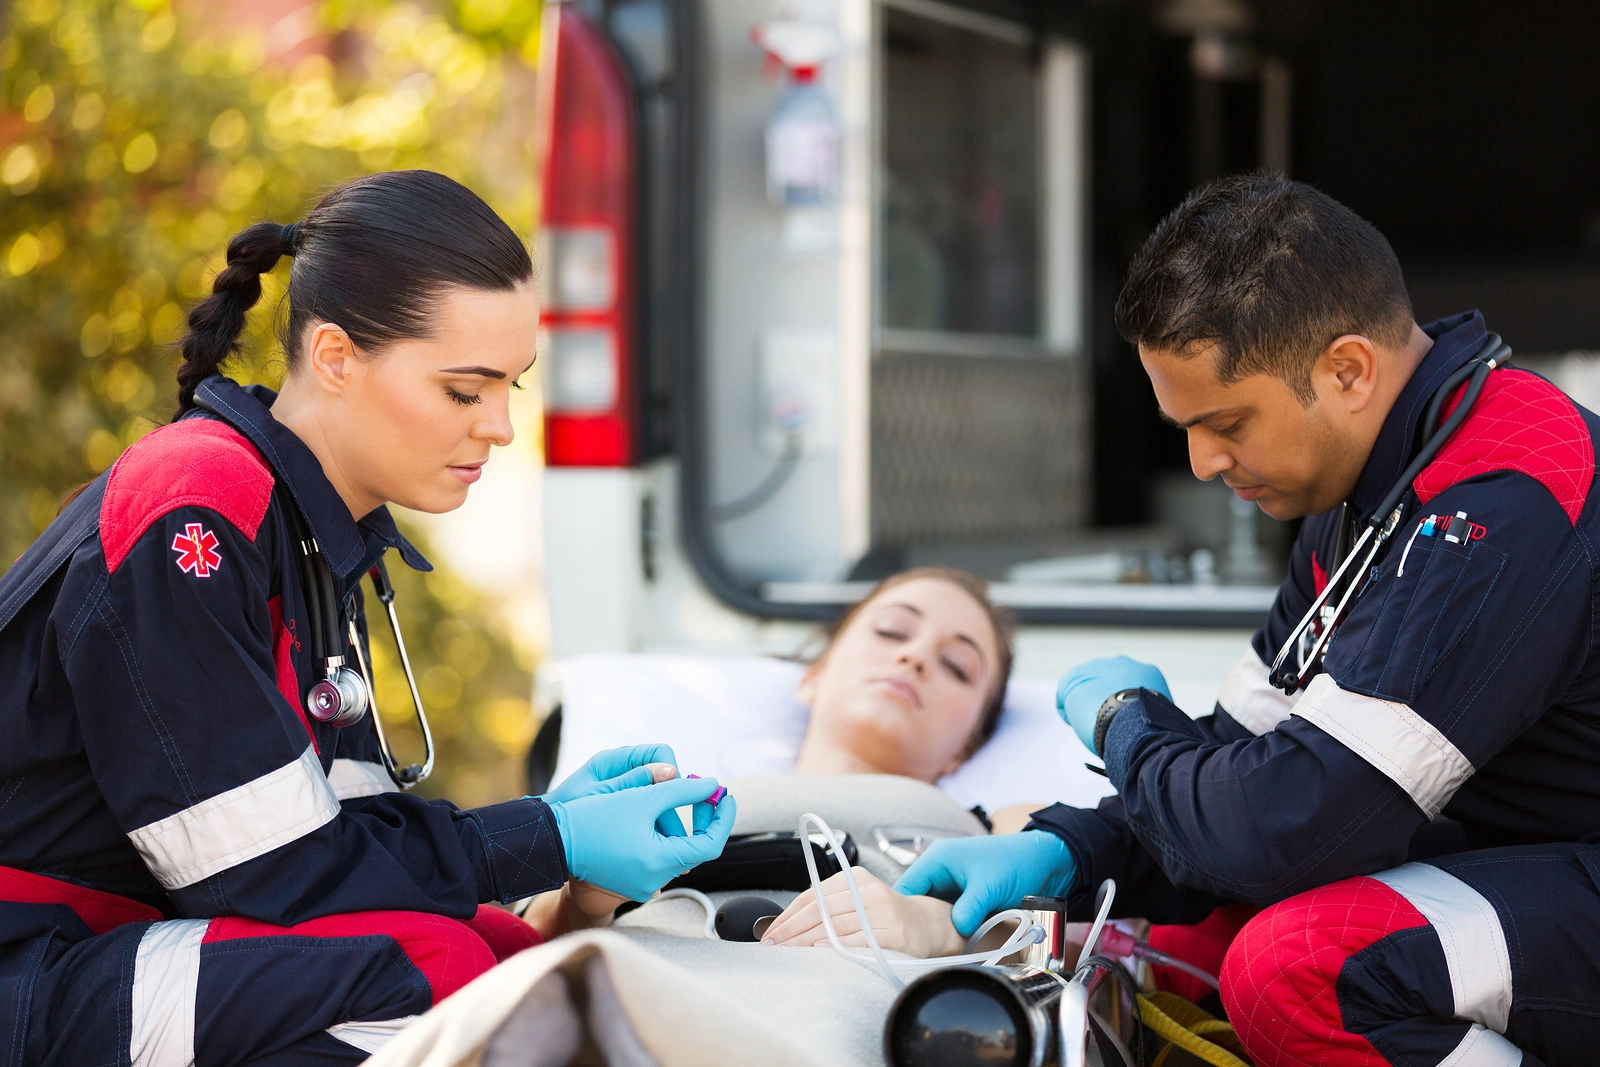 Healthcare workers and first responders